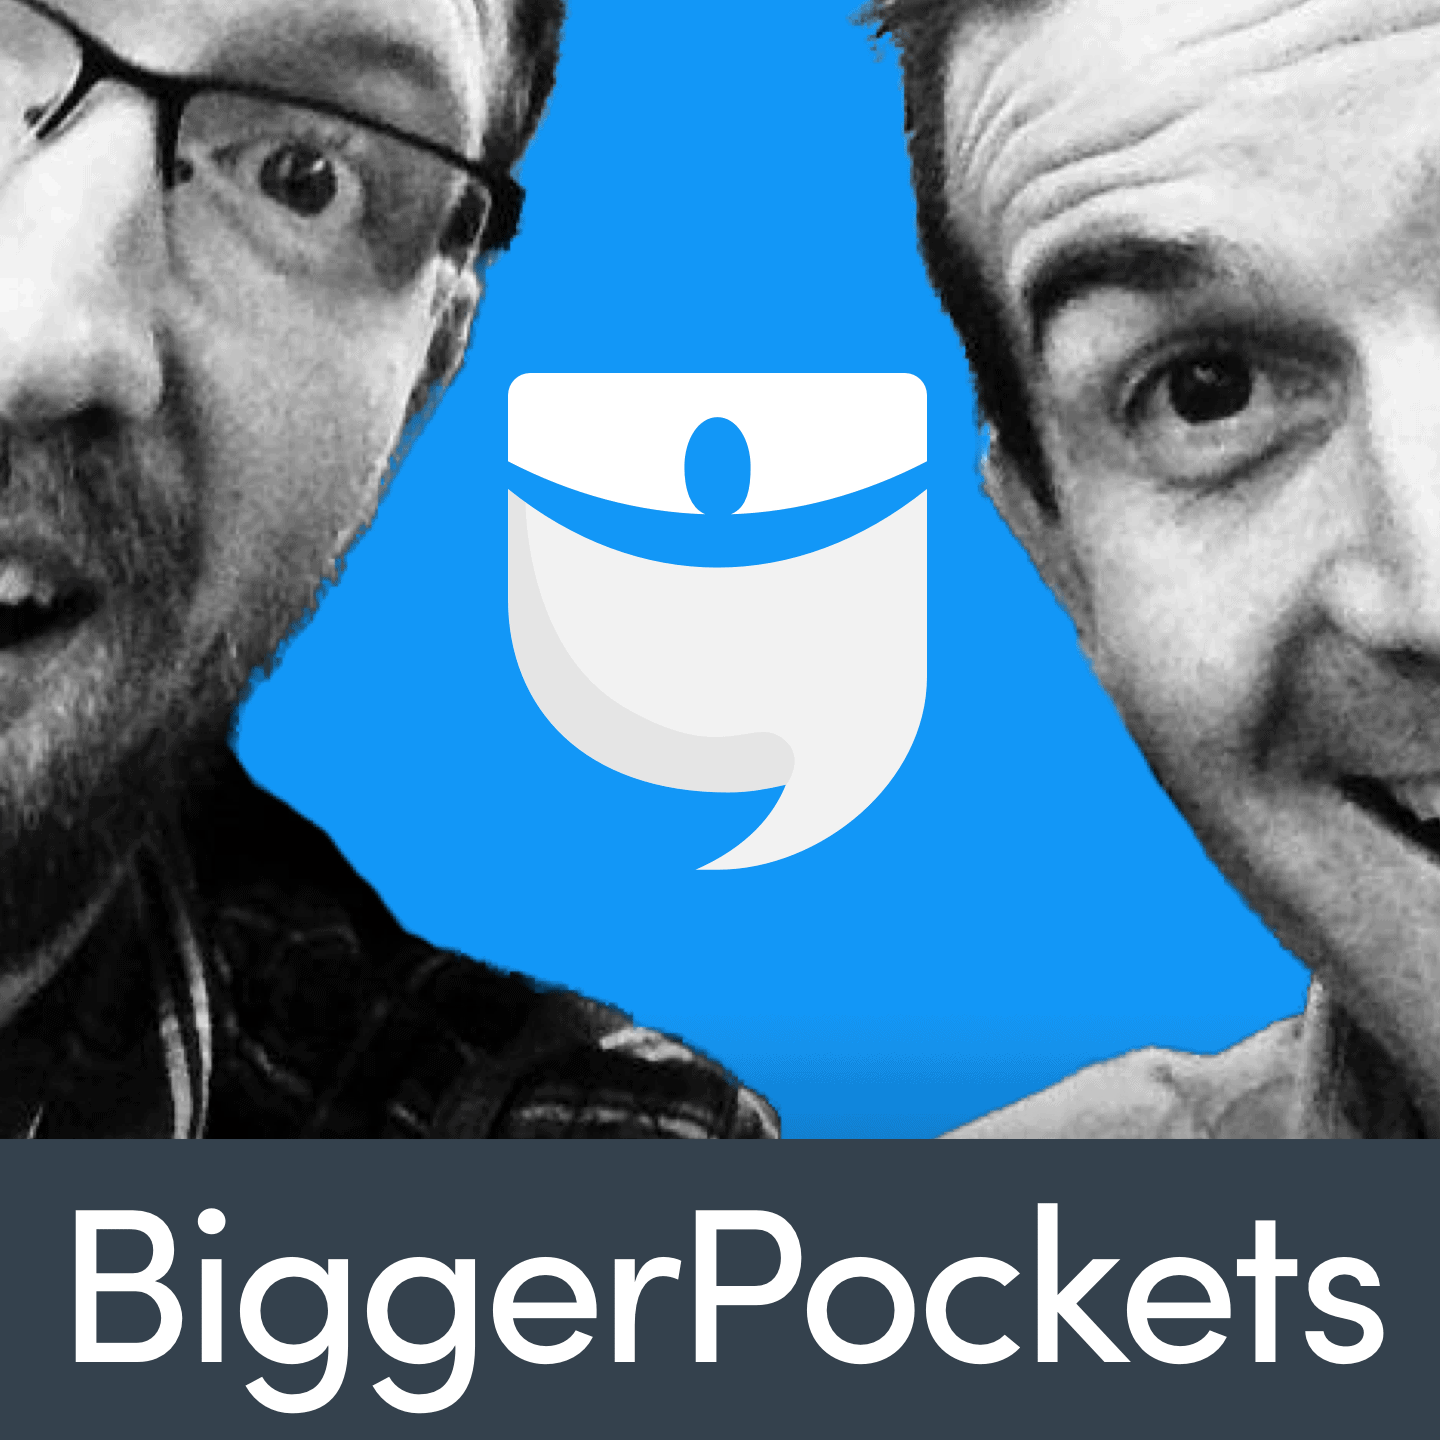 Listen to The Podcast " BiggerPockets Podcast : Real Estate Investing ...